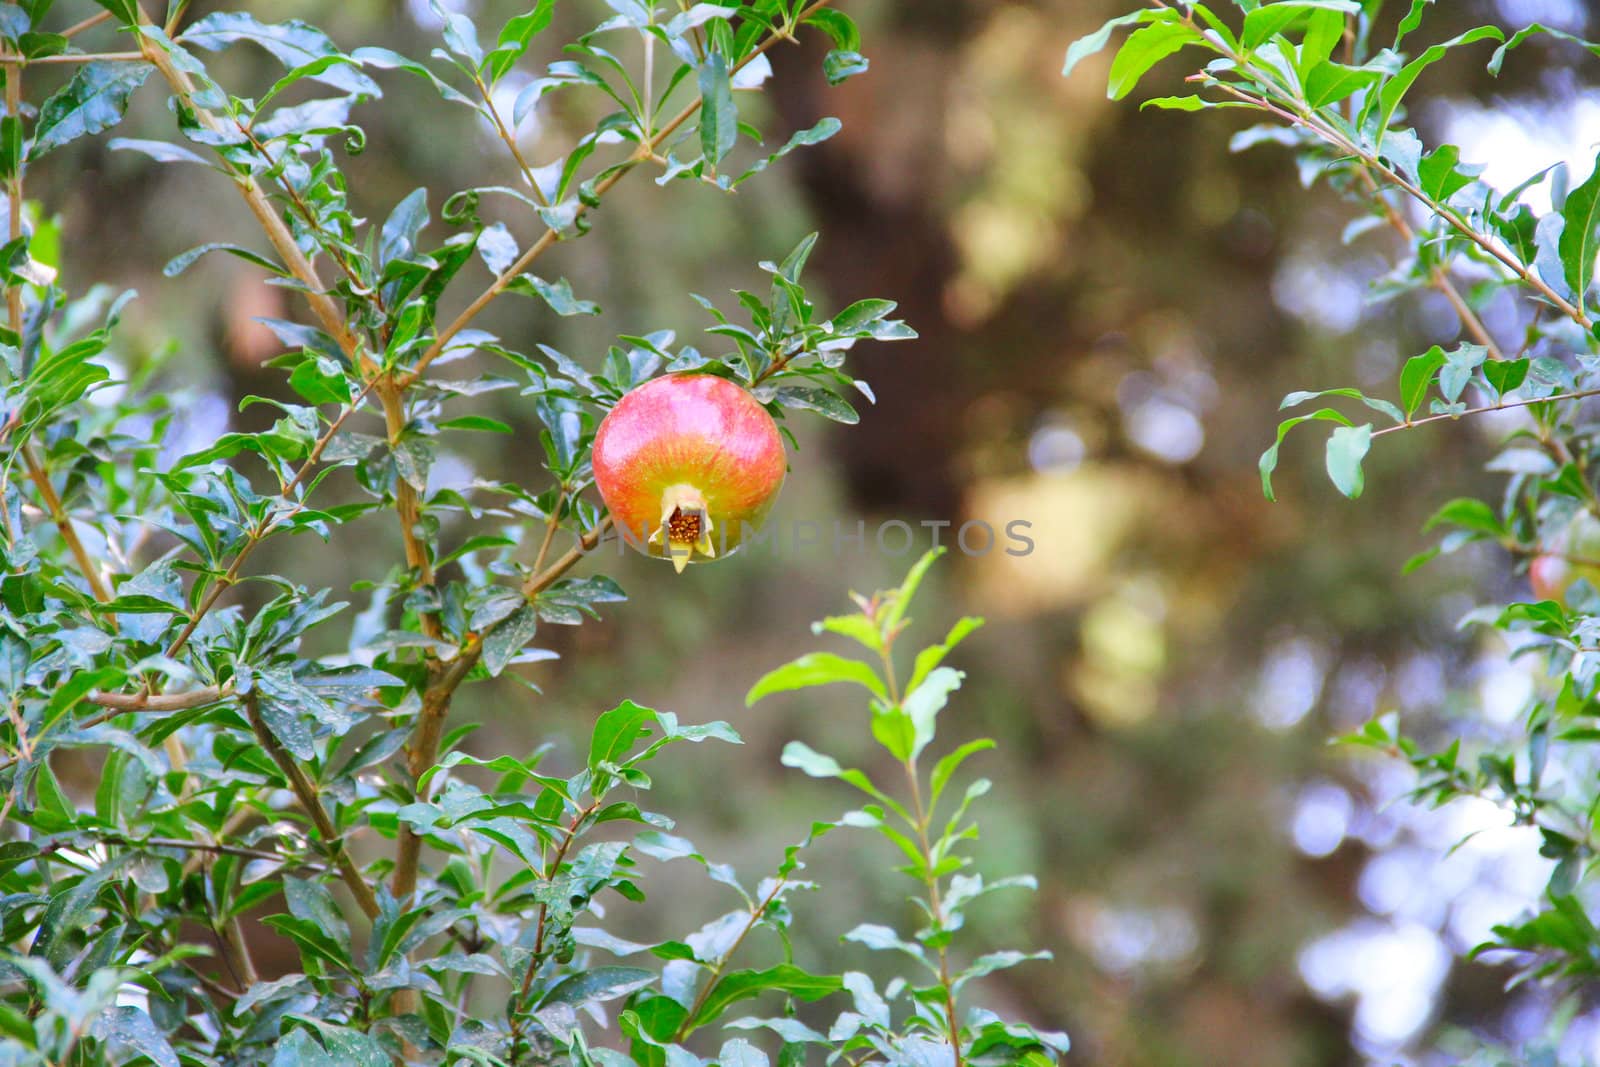 Pomegranate fruit on the tree in leaves close-up